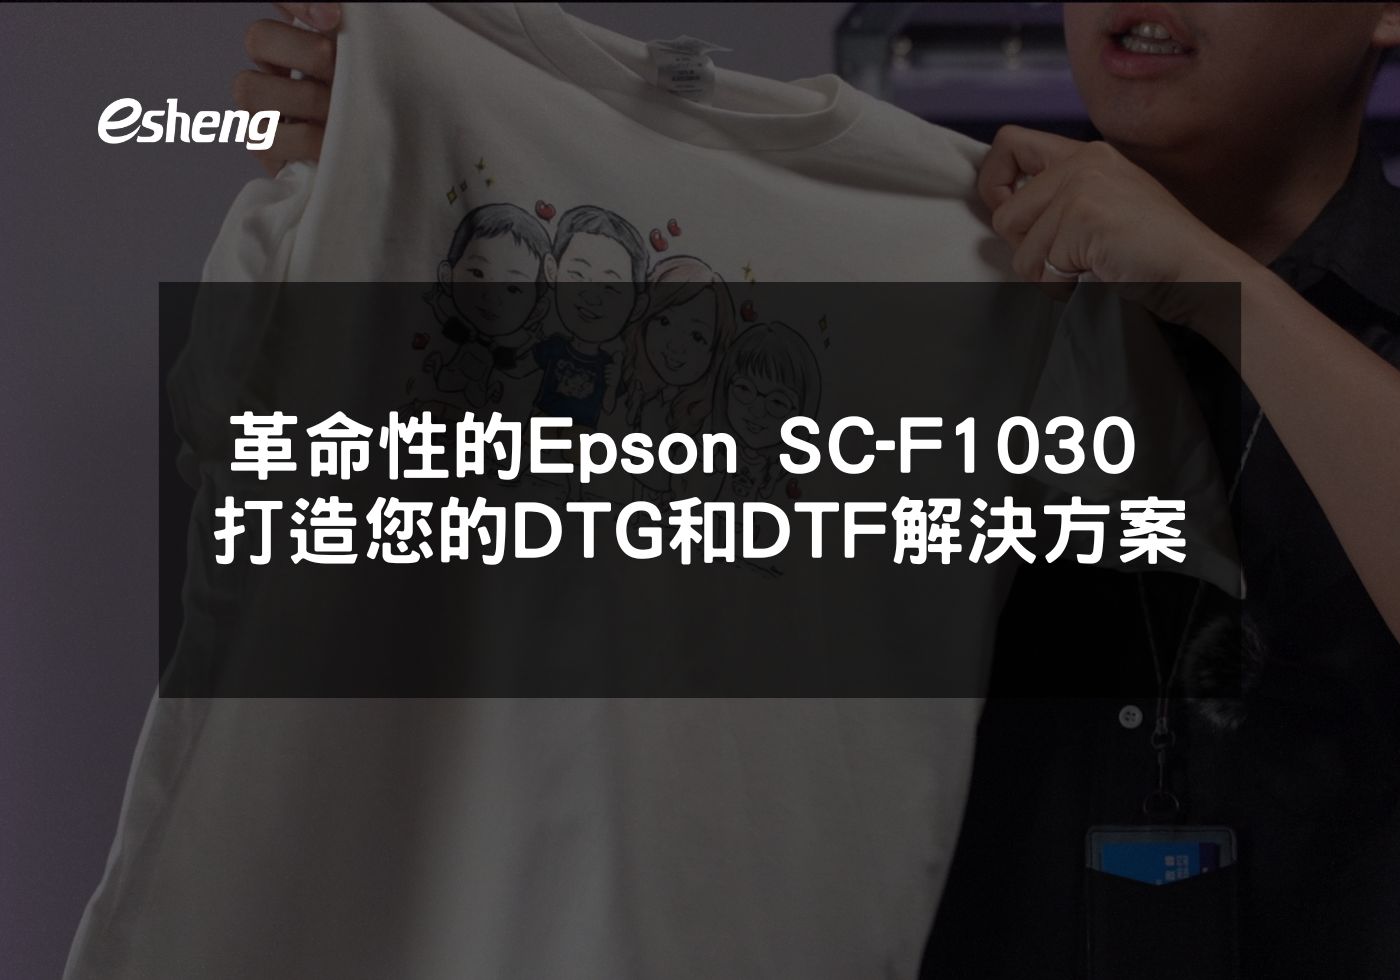 Revolutionary Ep革命性的Epson SC-F1030 打造您的DTG和DTF解決方案son SC F1030 Creates Your DTG and DTF Solutions